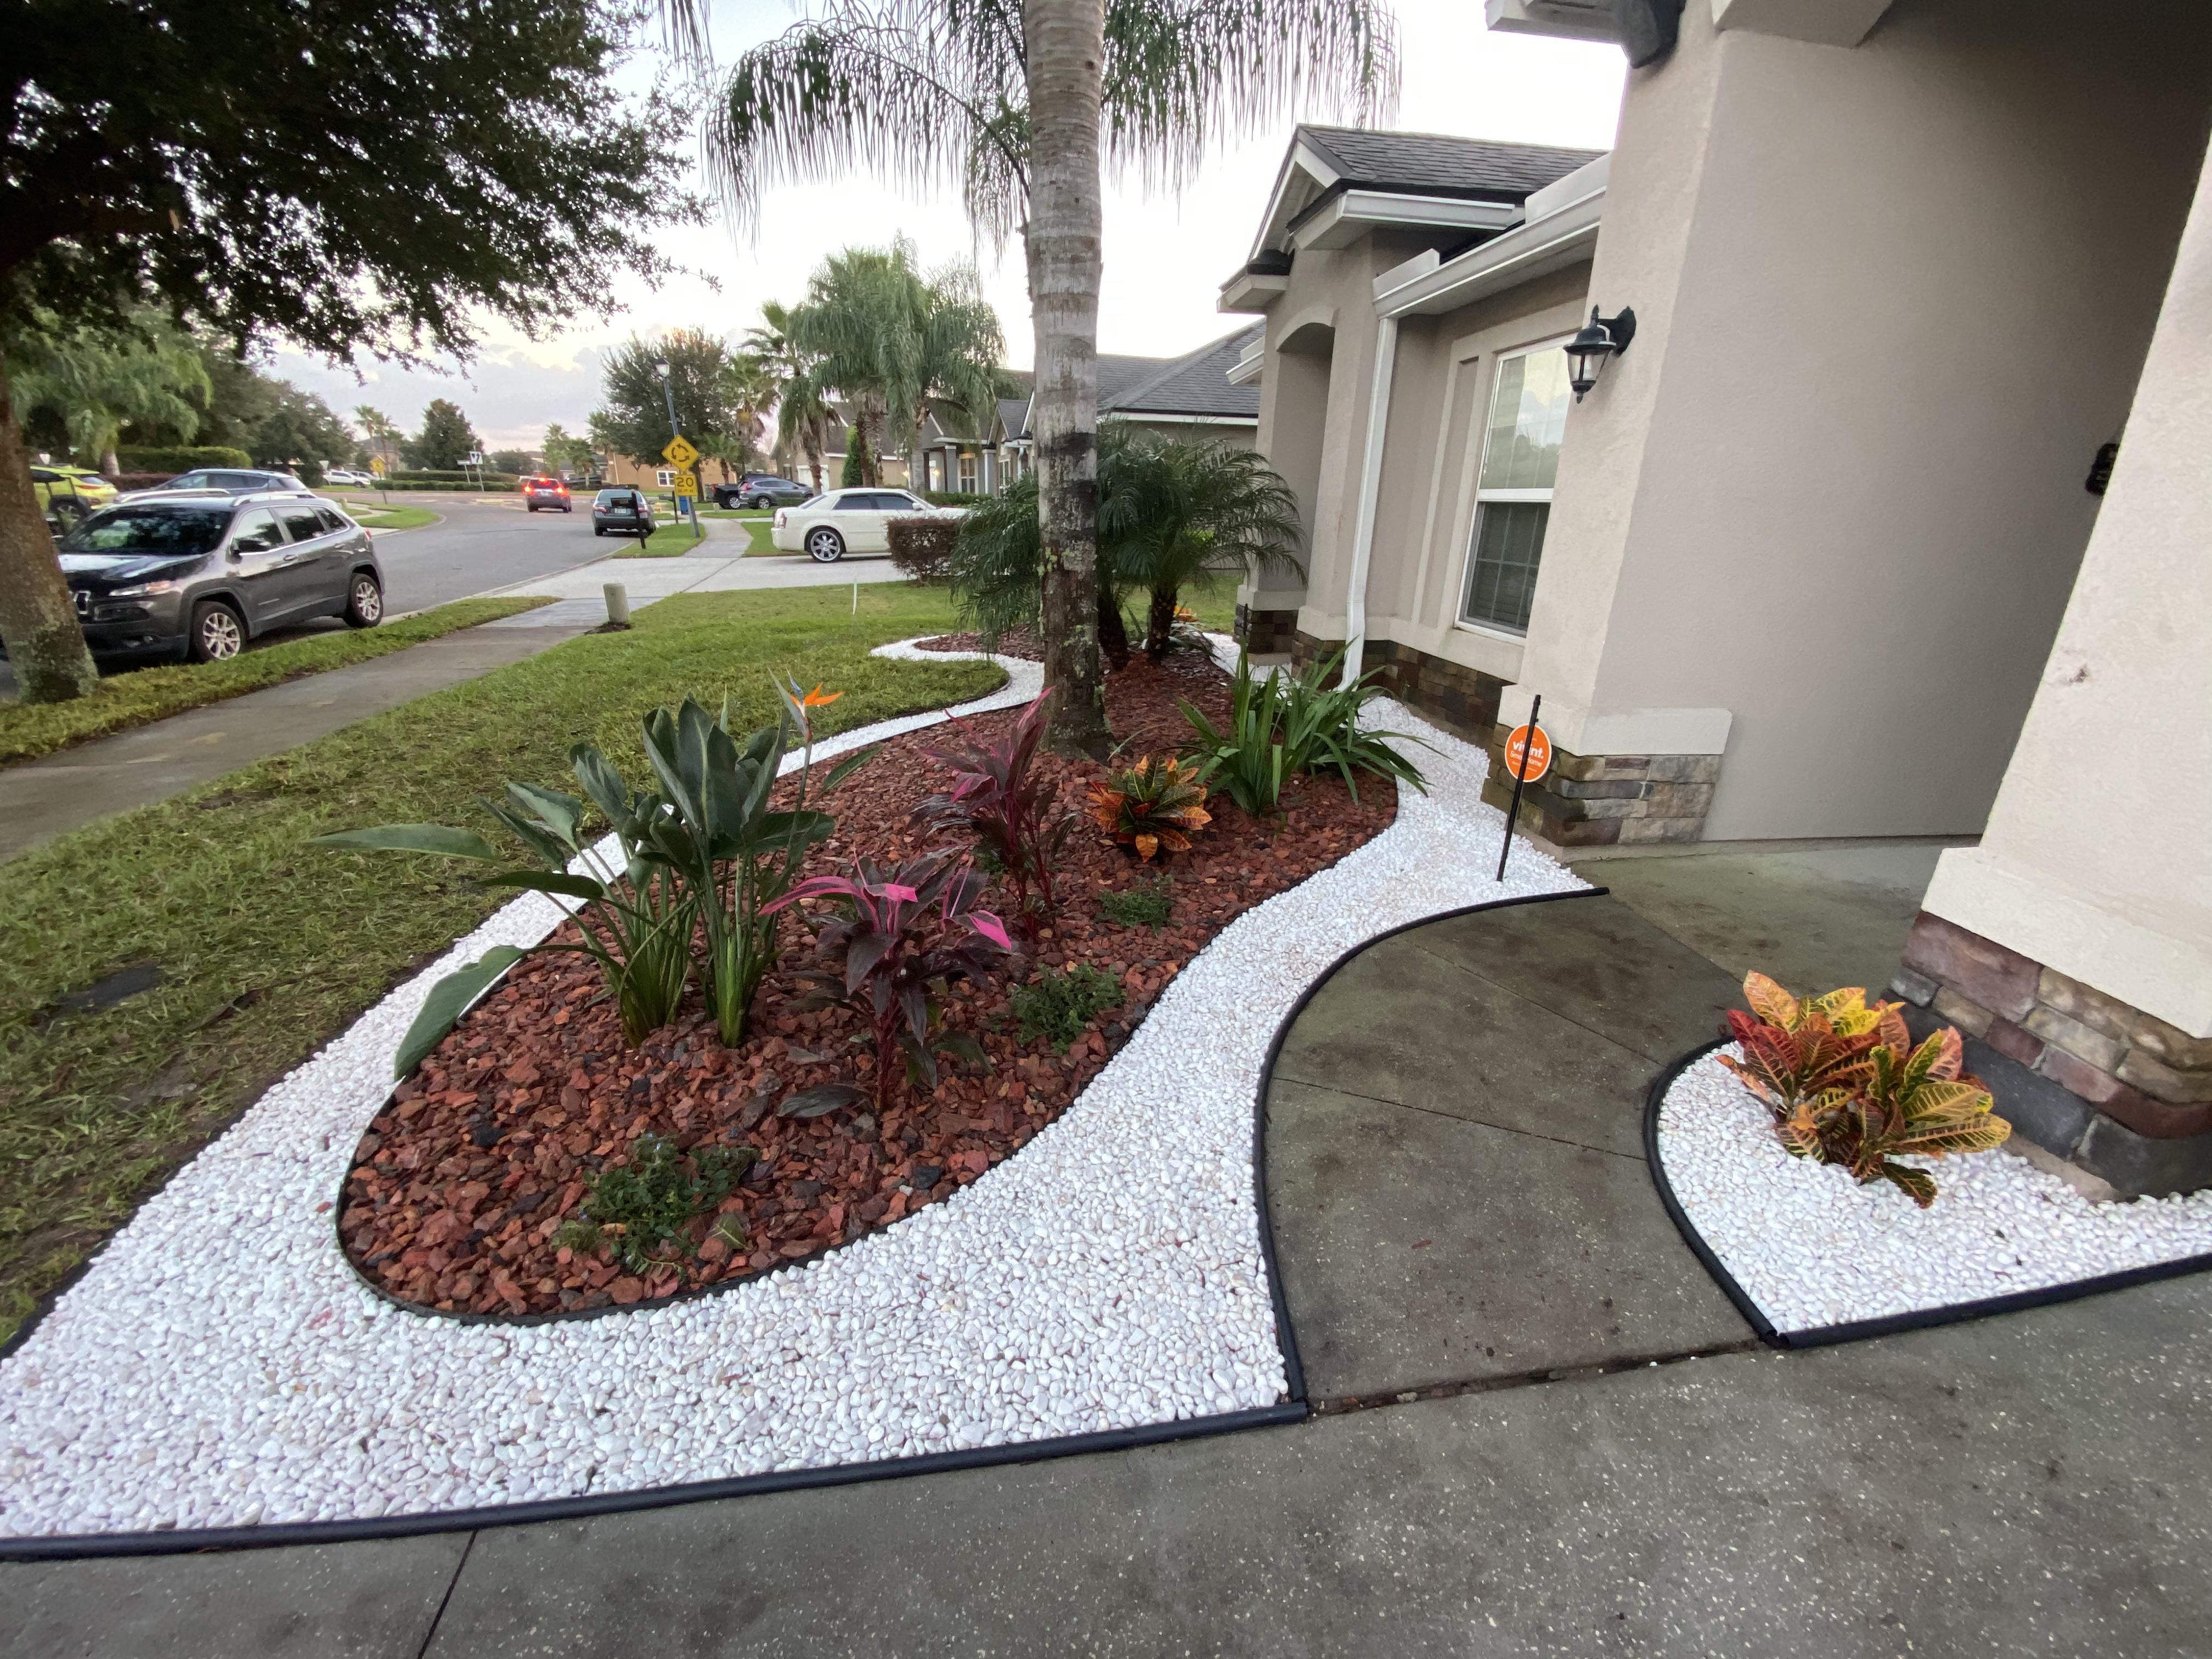 All Photos for Lawns By St. John in North East, Florida